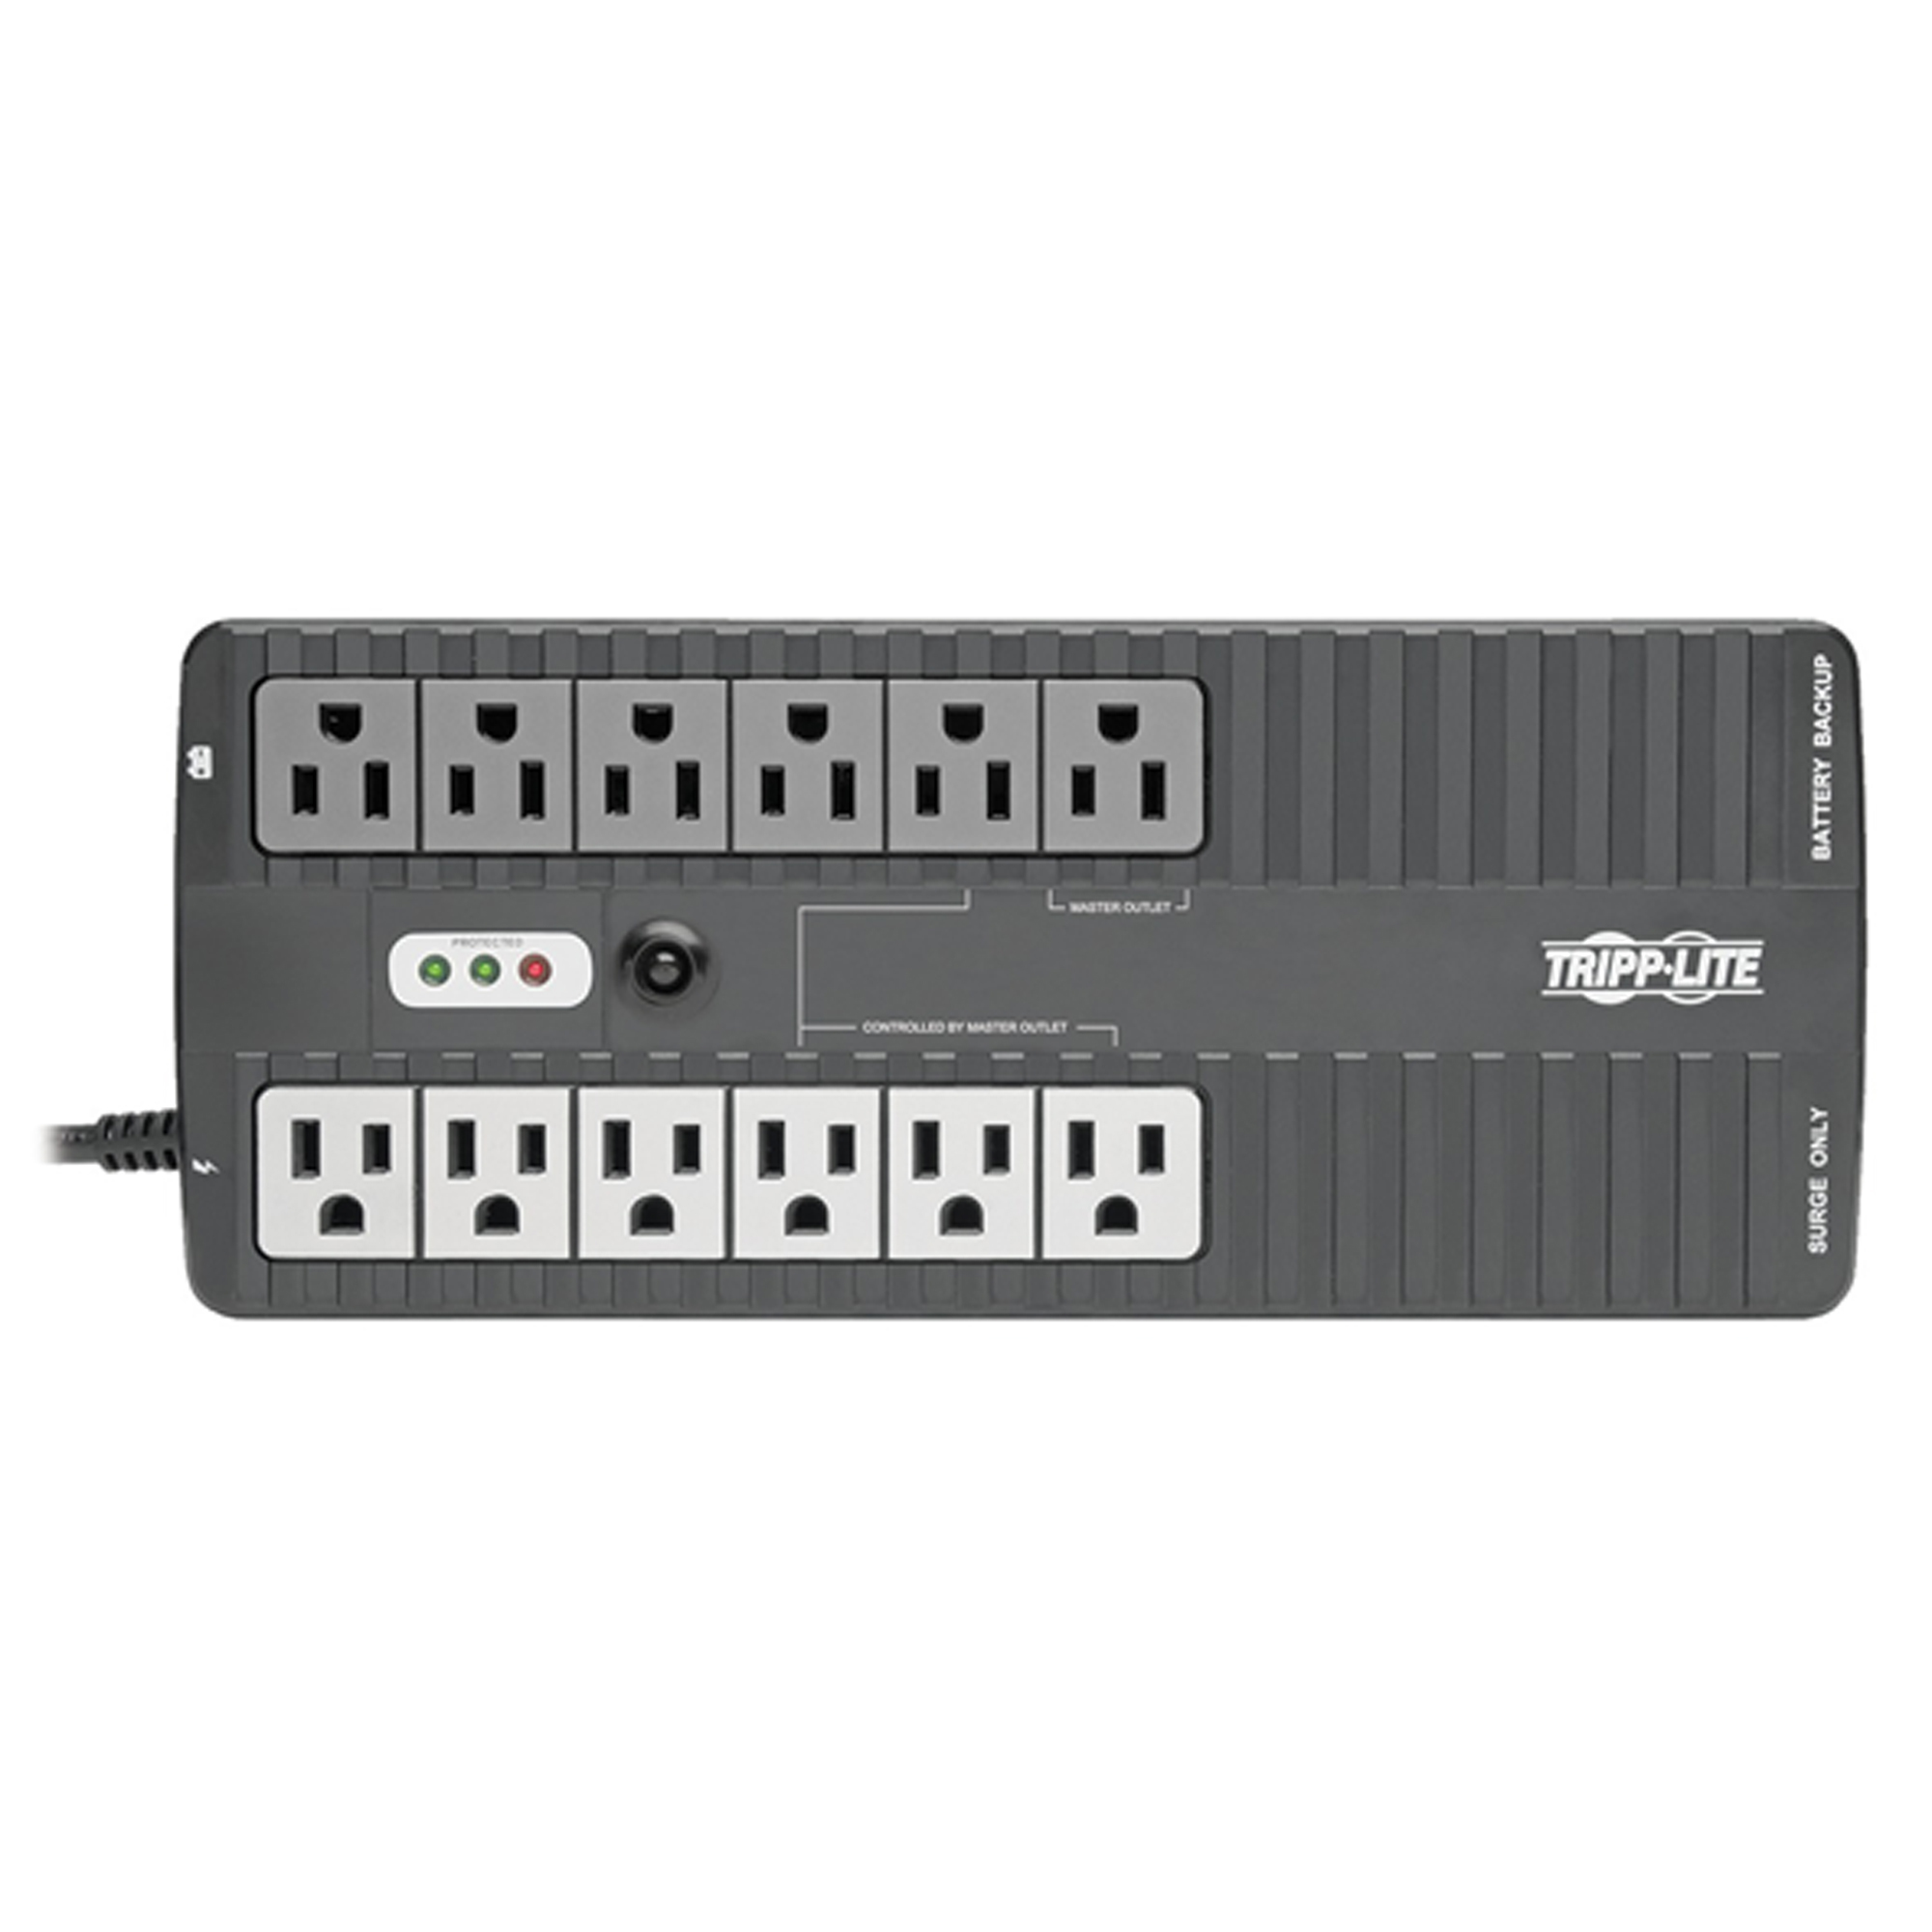 Tripp Lite by Eaton ECO Series, 12-Outlet Energy-Saving Standby UPS System, Volts 750 Running Watts 450 W, Model ECO750UPS